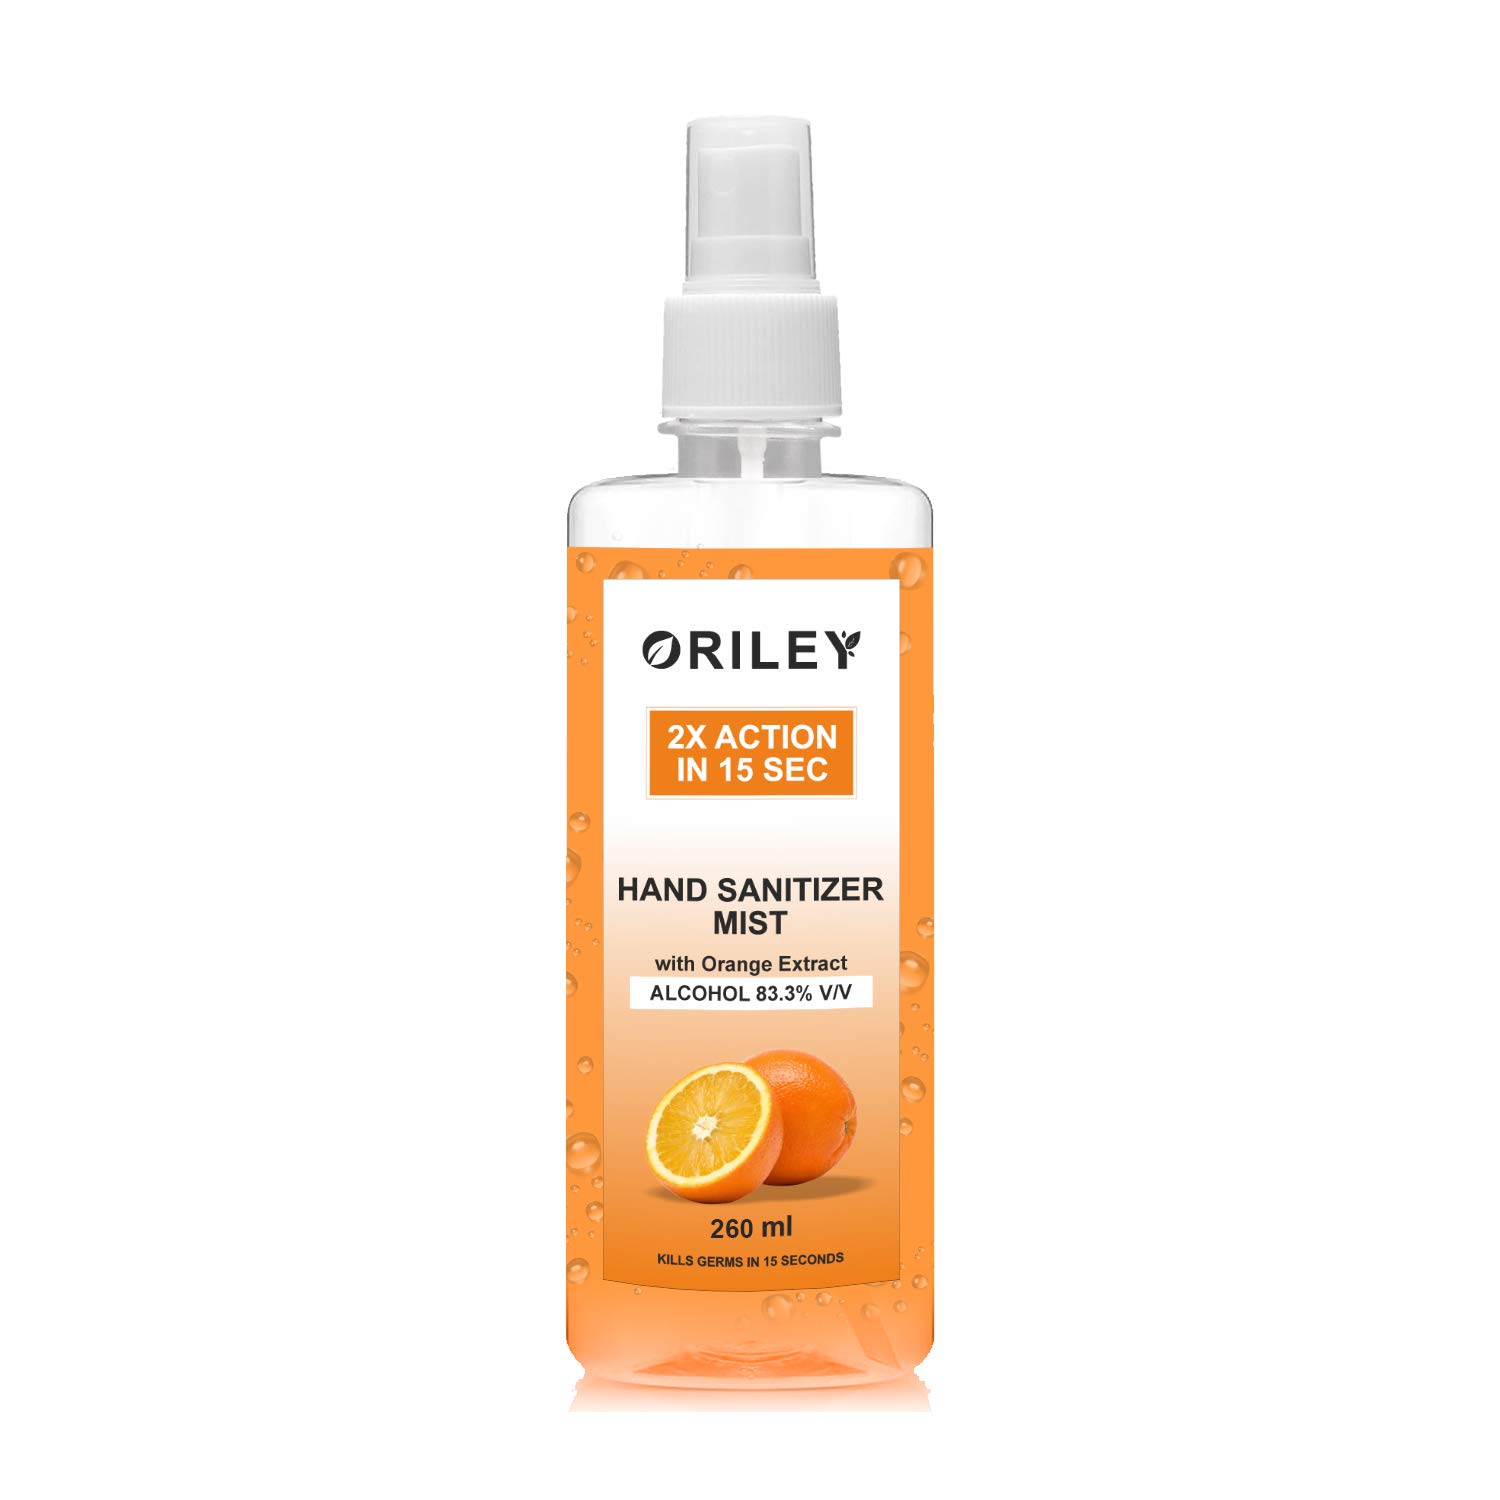 ORILEY 2X Action Hand Sanitizer